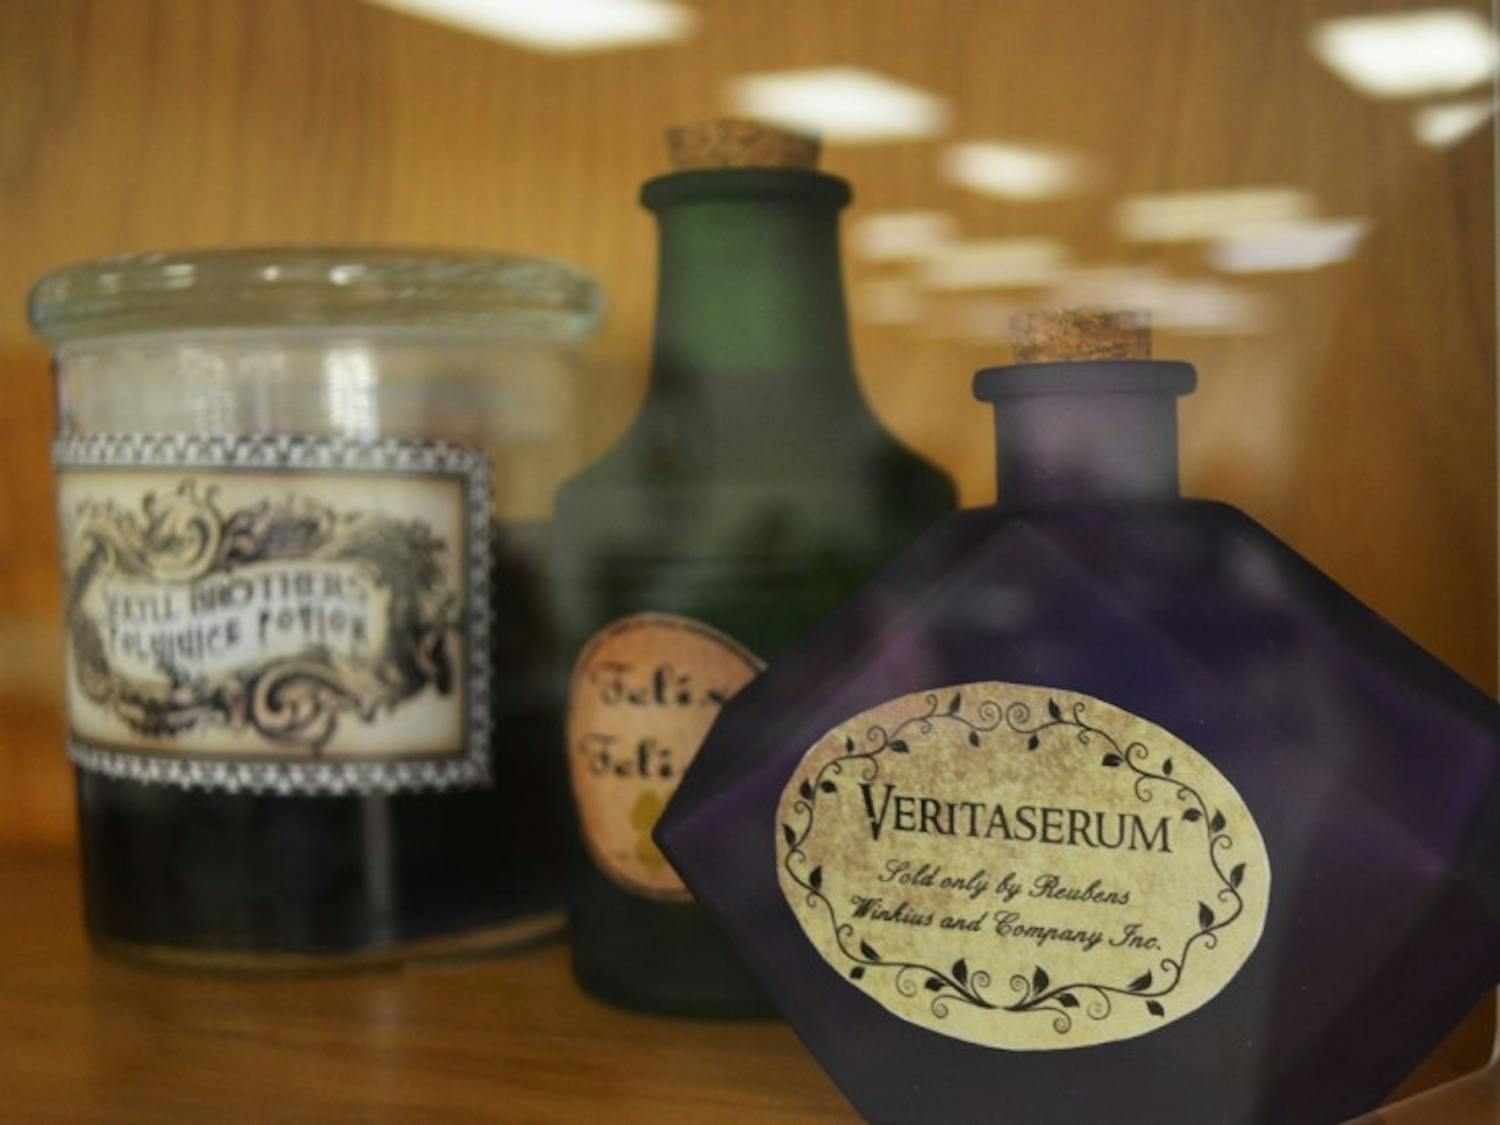 Veritaserum is the truth serum featured in the Harry Potter series. Students at UF can explore the magic of science and medicine at the Harry Potter’s World exhibit in the Health Science Center Library beginning Thursday.